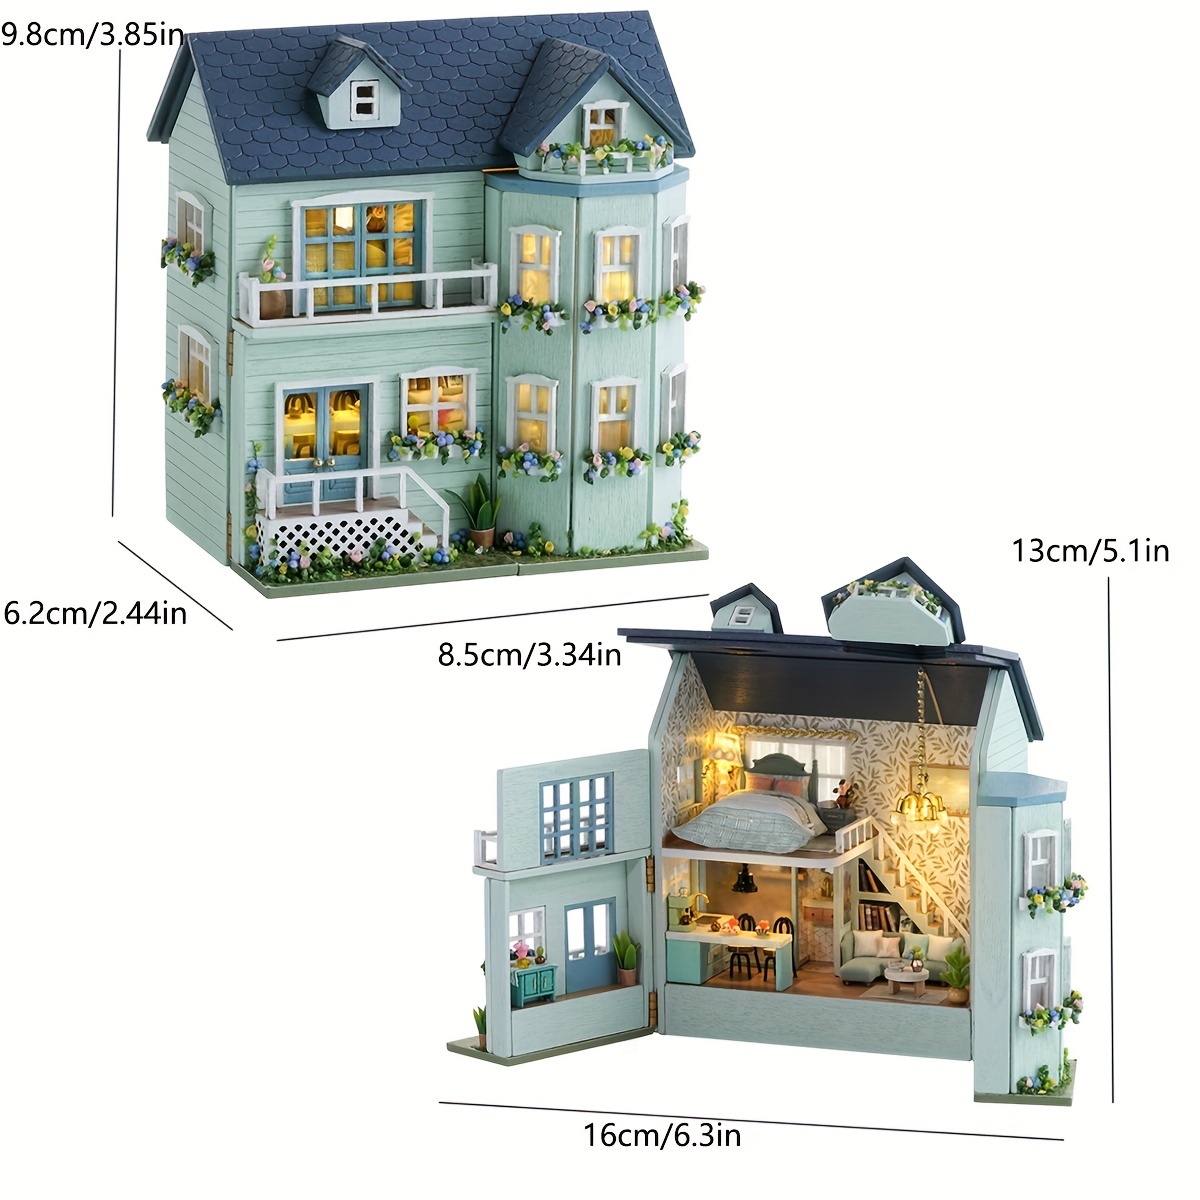 3D Wooden Puzzle DIY Craft Kits- Model Puzzle Assembly Model Kit and House  Furniture Set-Fantasy Villa Birthday Gift, for Kids,Teens and Adults